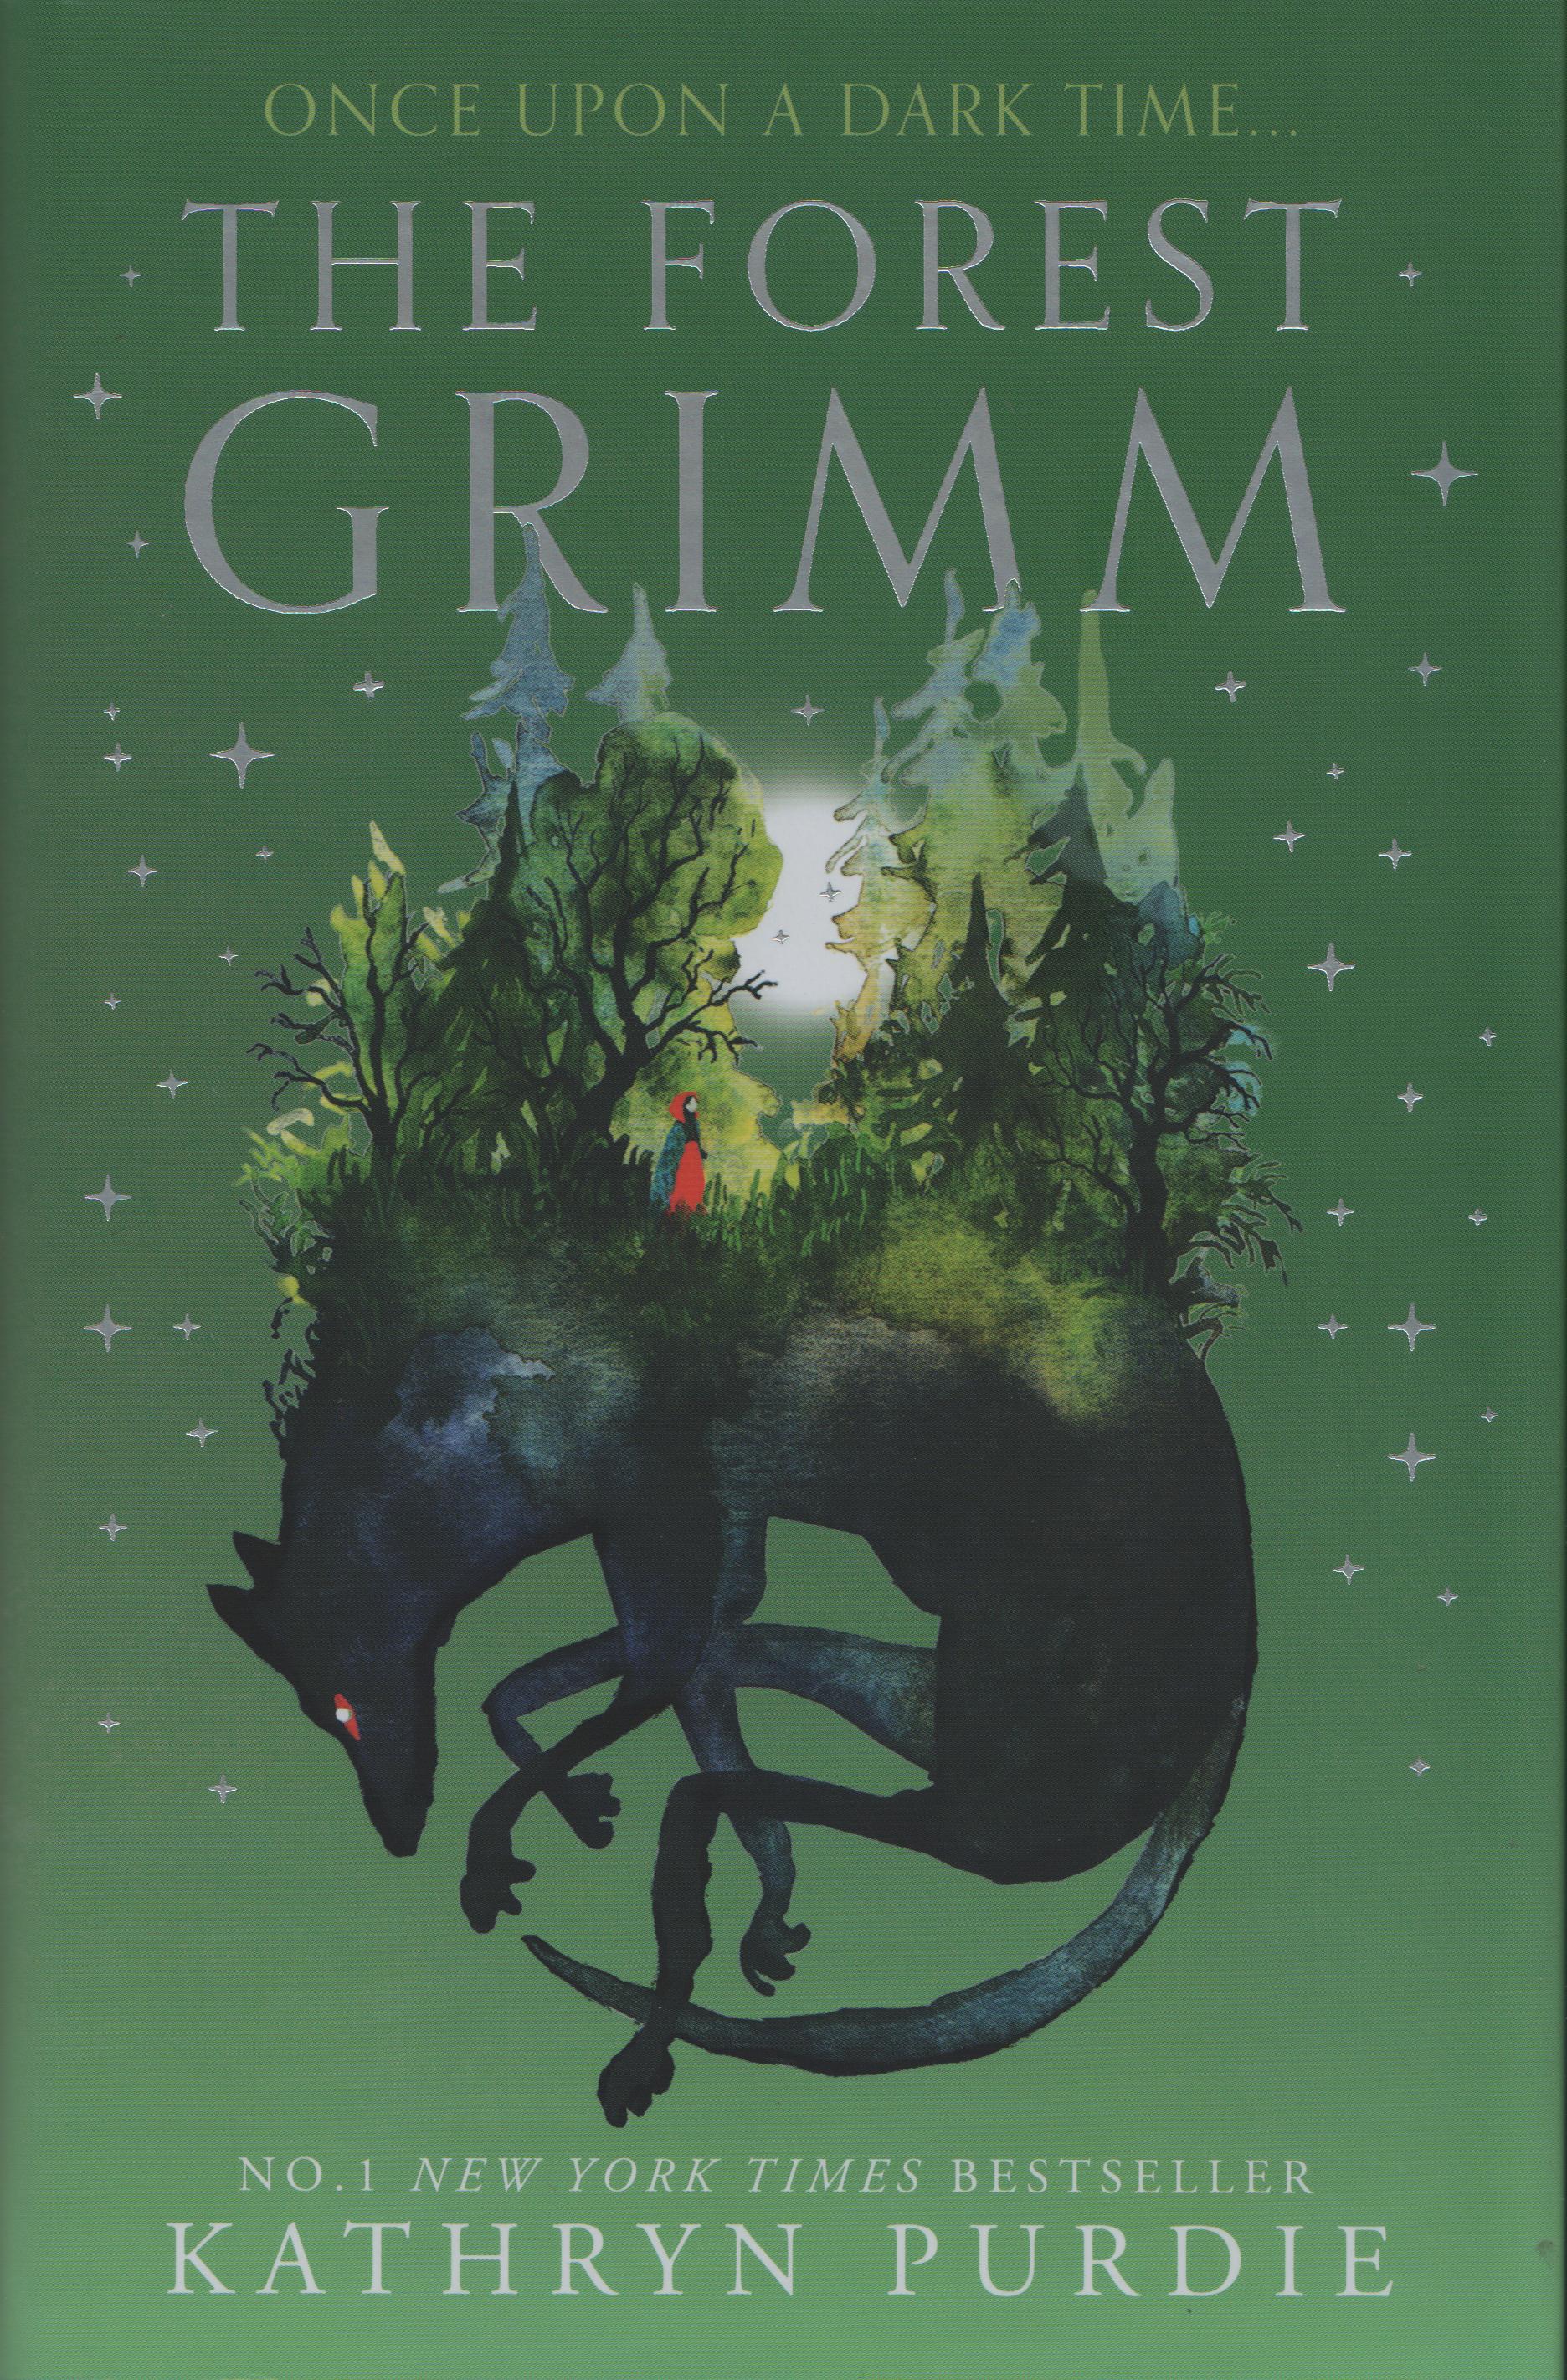 Kathryn Purdie: The Forest Grimm (Hardcover, Magpie (HarperCollinsPublishers))